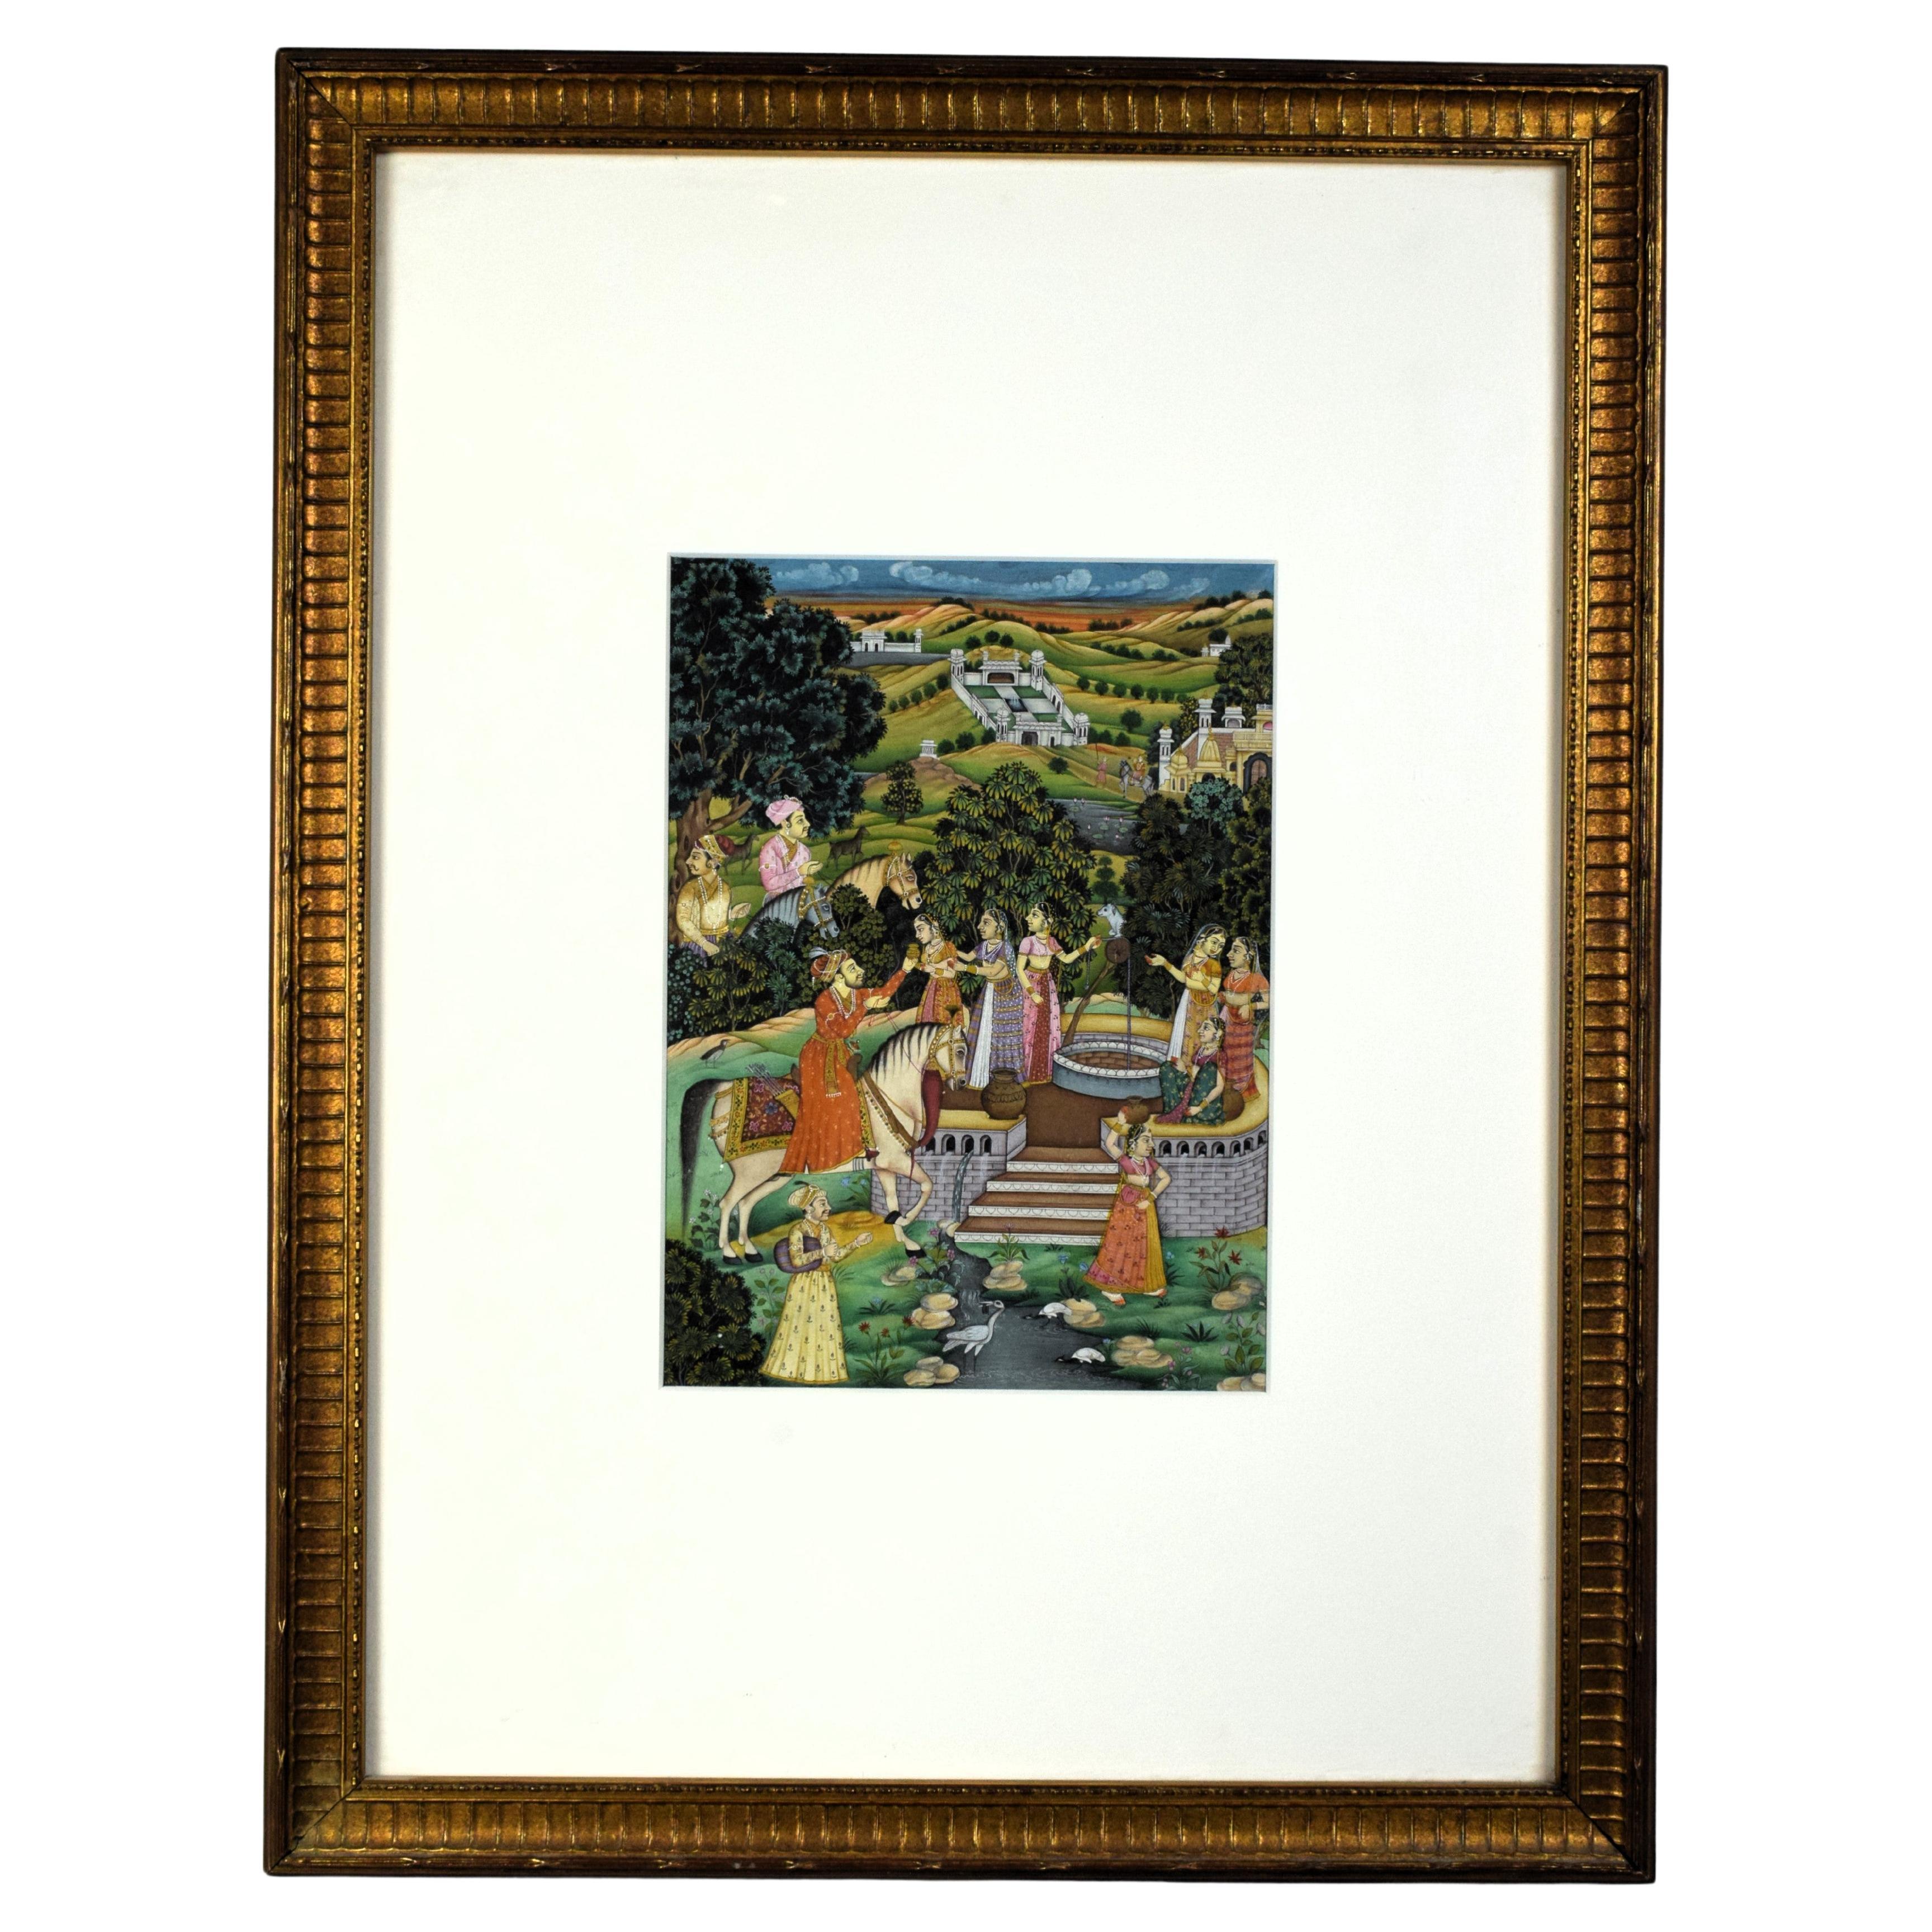 What is the Mughal style of miniature painting?